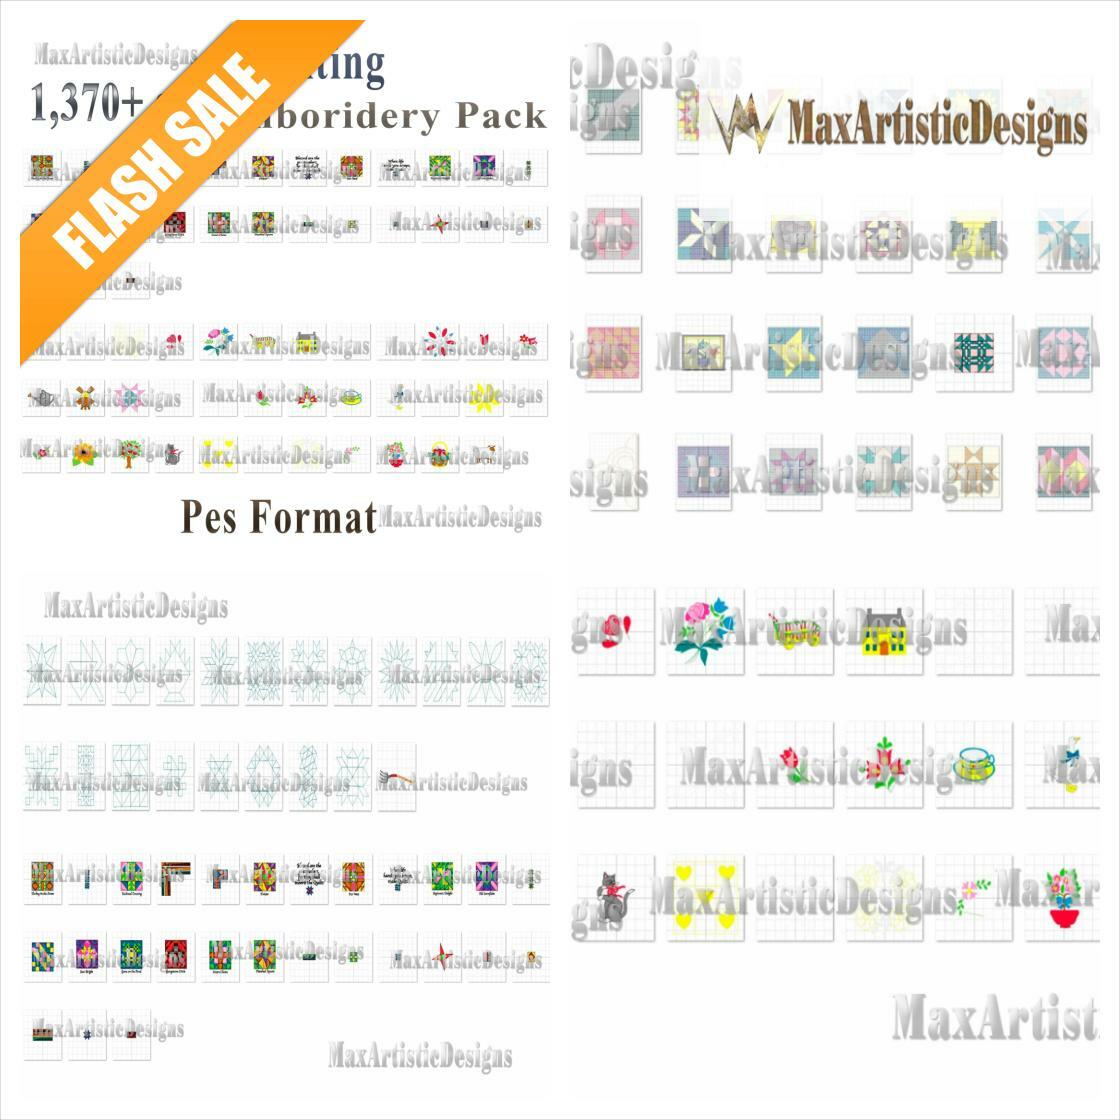 🐣. Offer Xtras! 1370+ Quilting embroidery design patterns multiple models perfect fit - pes format digital download for $7.99 #QuiltingDesigns #EmbroideryPatterns